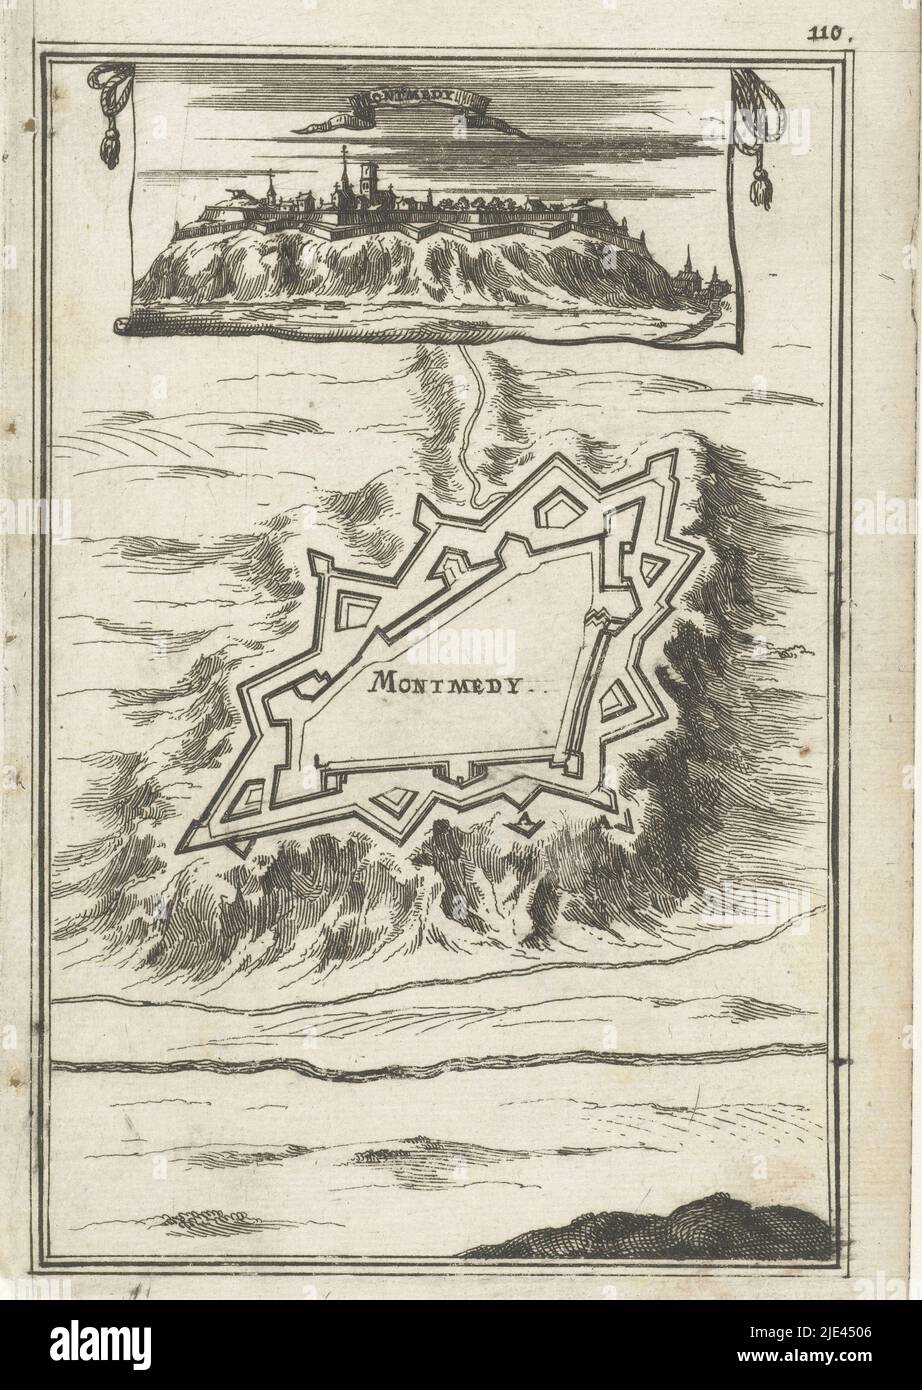 Illustration for 'Den Arbeid van Mars' by Allain Manesson Mallet, Romeyn de Hooghe, 1672, Ground plan of a fortress on a mountain (Montmédy). Above it, as if on a canvas or piece of paper, a view of the town in question. In the upper right-hand corner the number 110 (= the number of the page in the book against which the illustration is placed)., print maker: Romeyn de Hooghe, Romeyn de Hooghe, Amsterdam, 1672, paper, etching, engraving, h 185 mm × w 112 mm Stock Photo